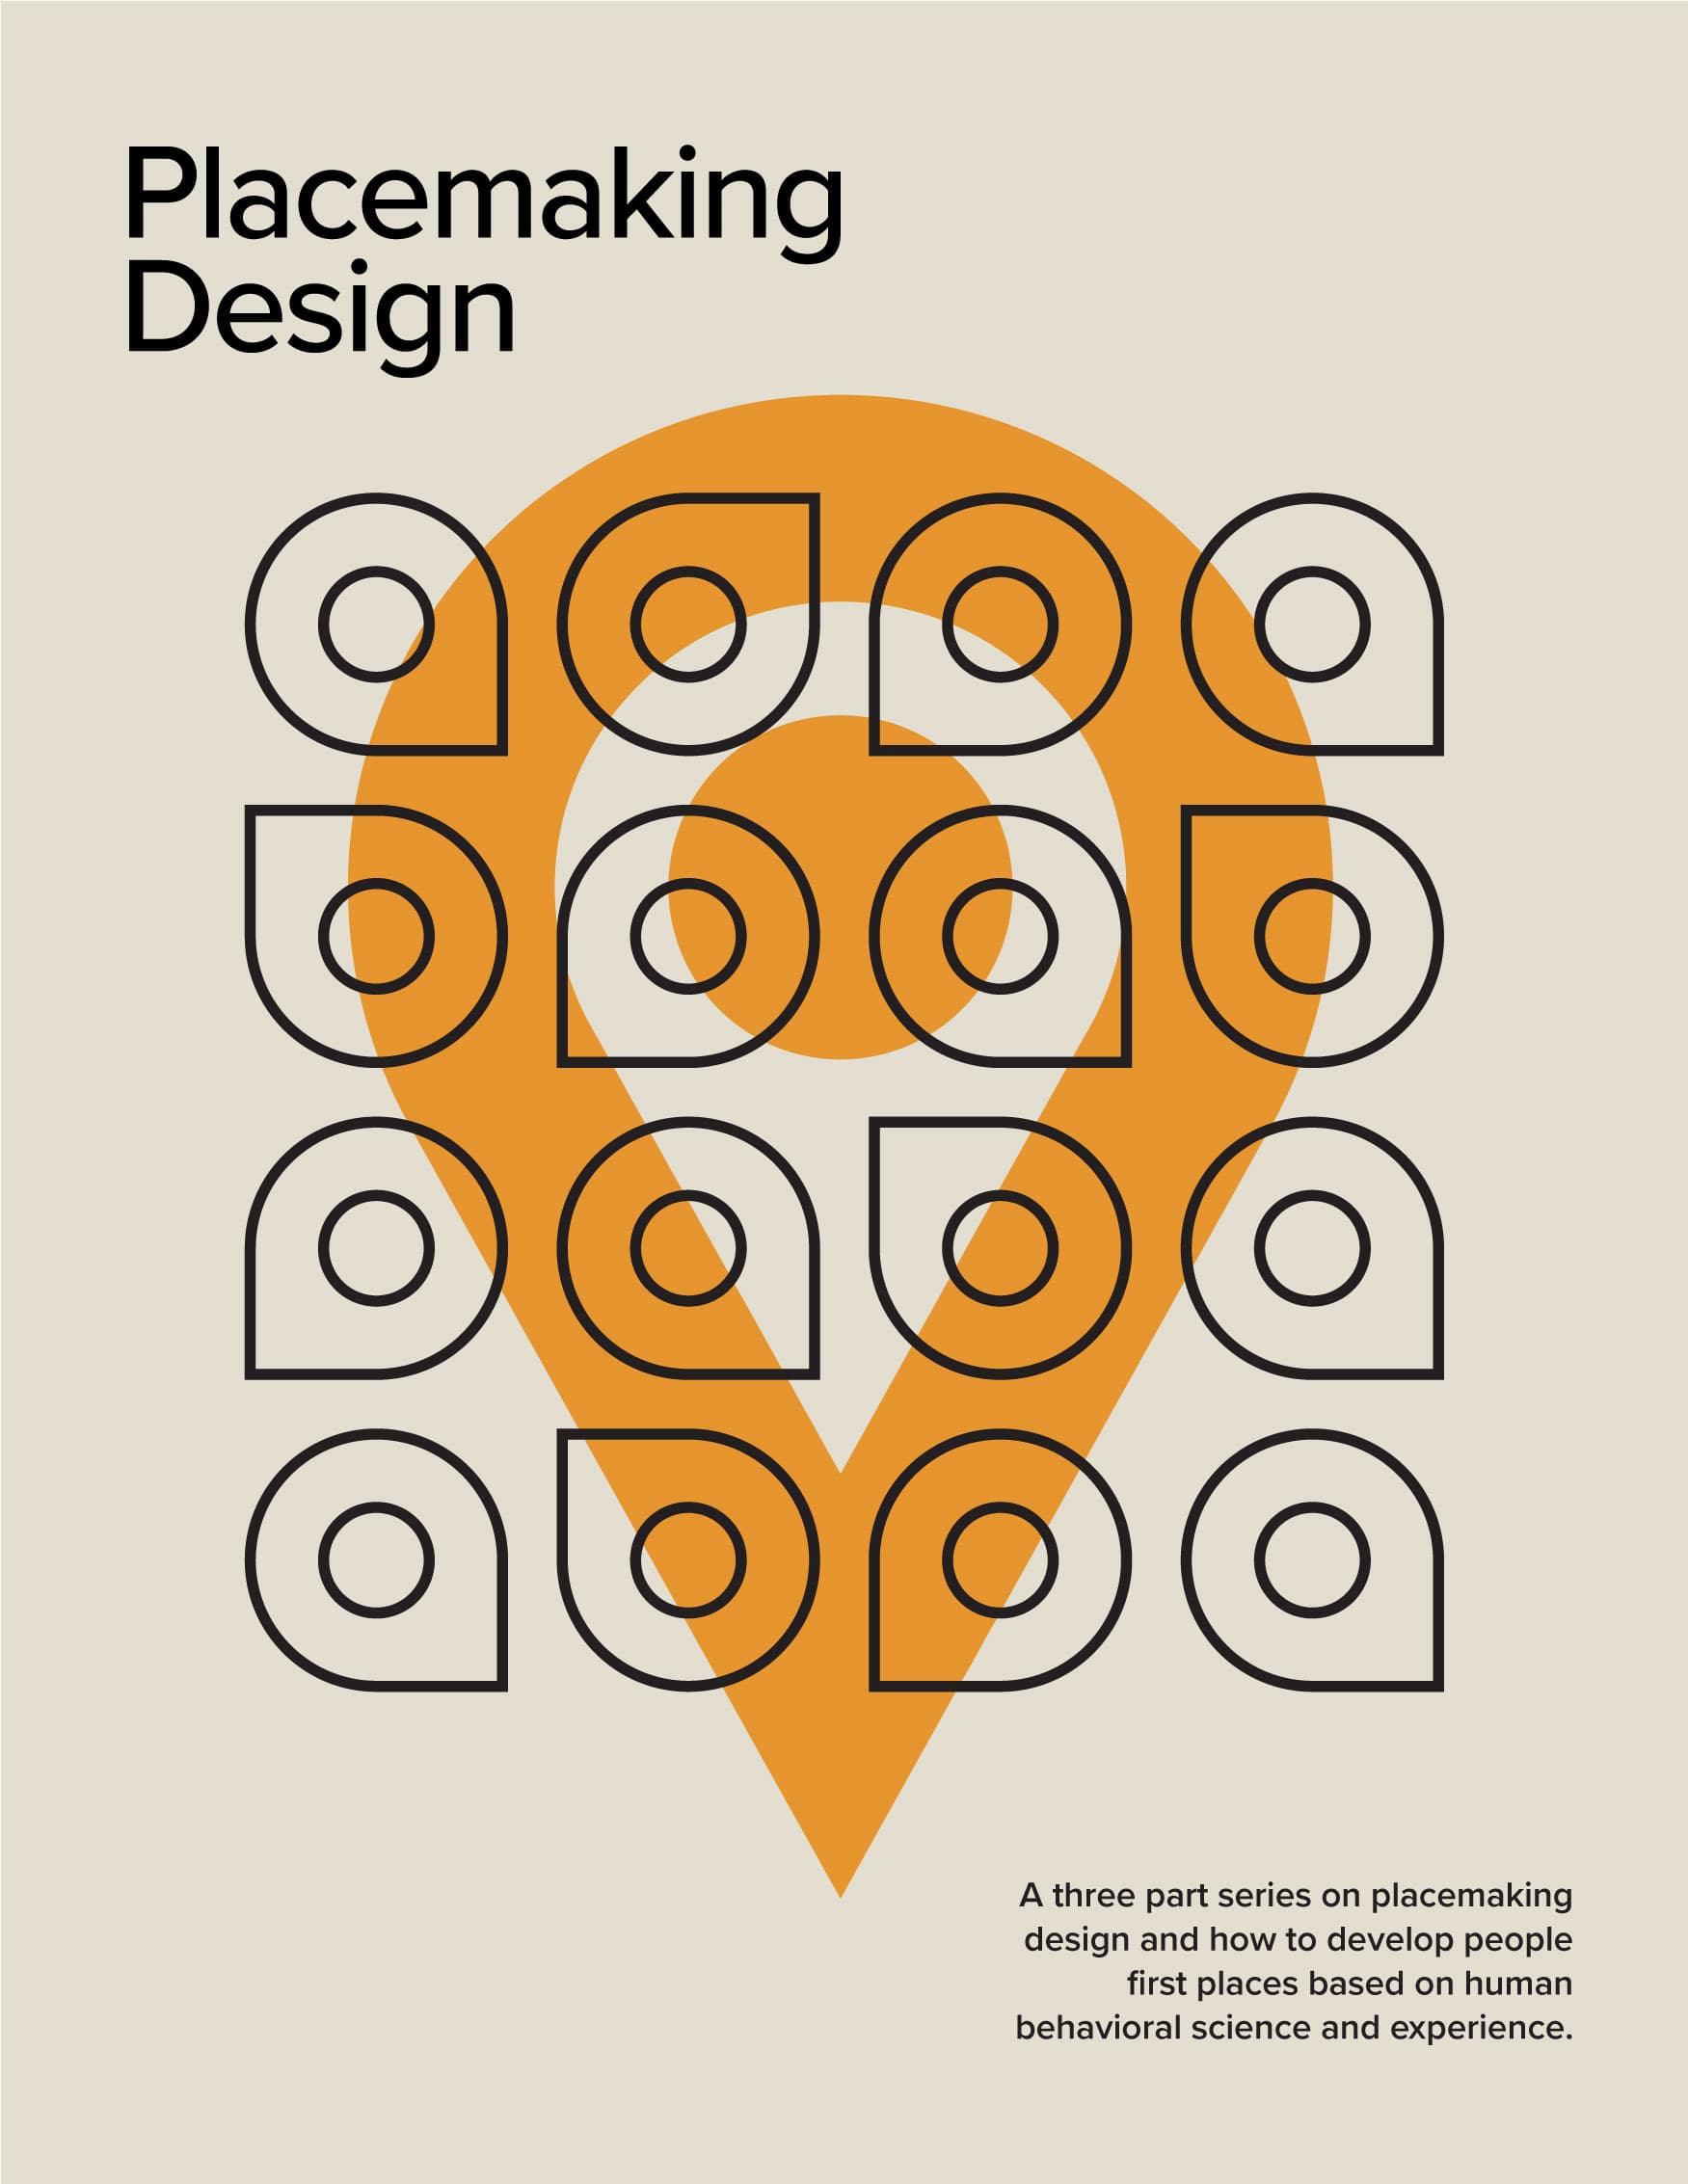 Placemaking design article series poster design with location icon graphics